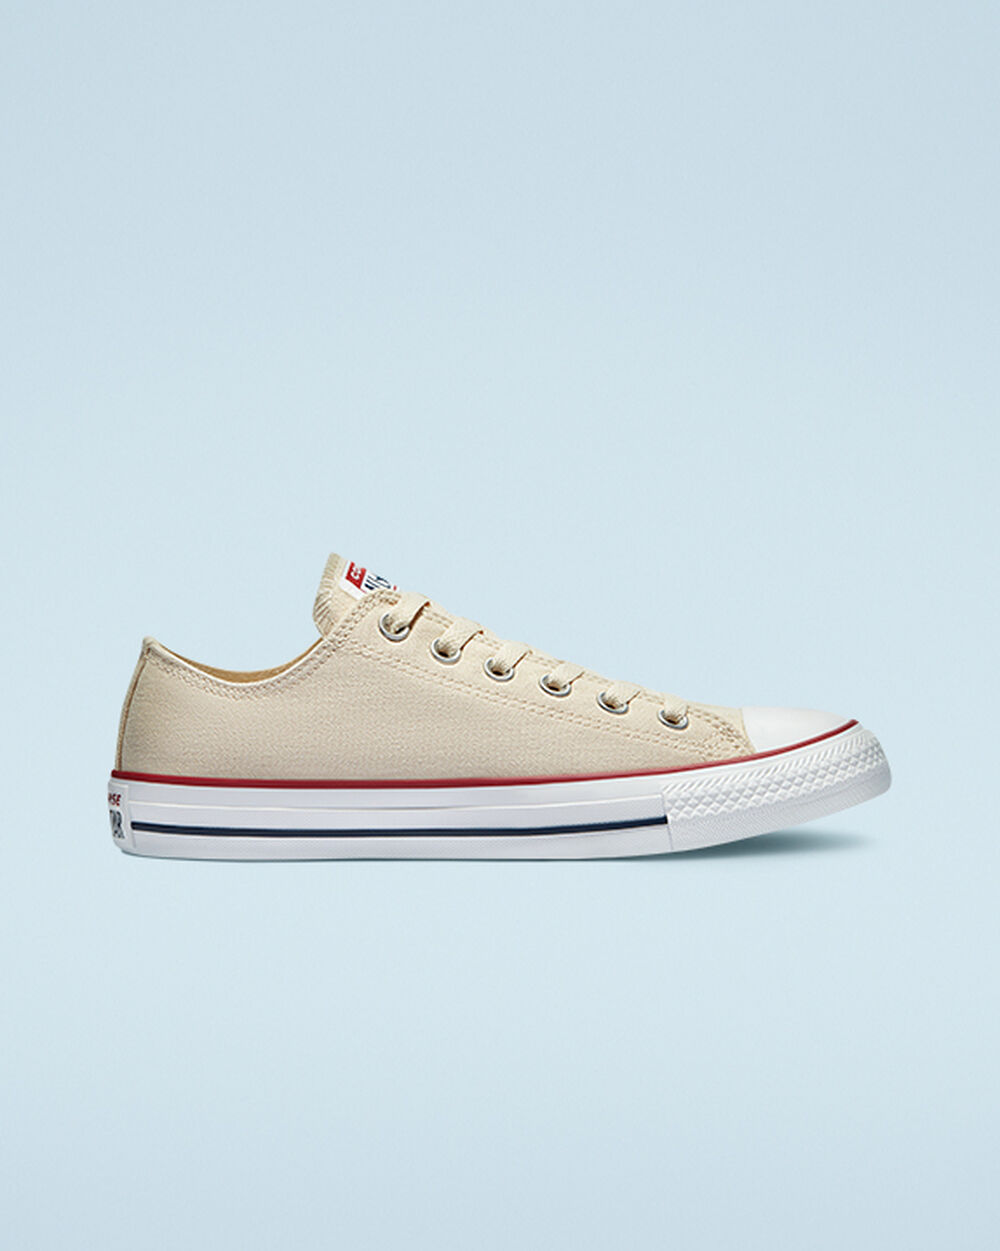 Tenis Converse Chuck Taylor All Star Mujer Beige Blancos | Mexico-840626